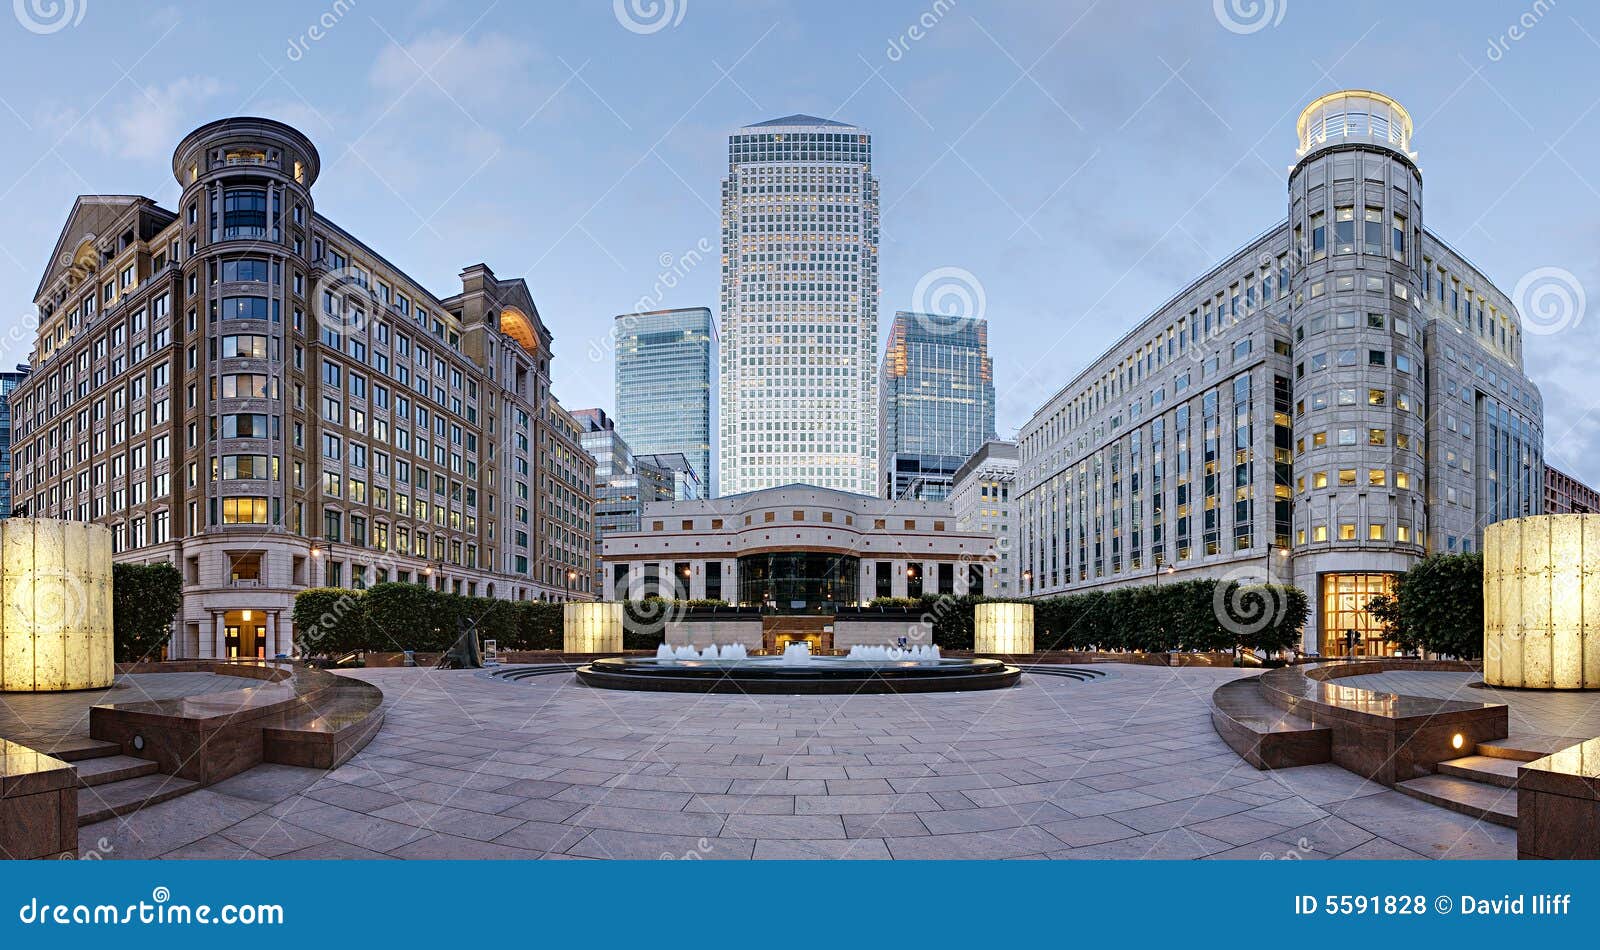 canary wharf skyline from cabot square, london